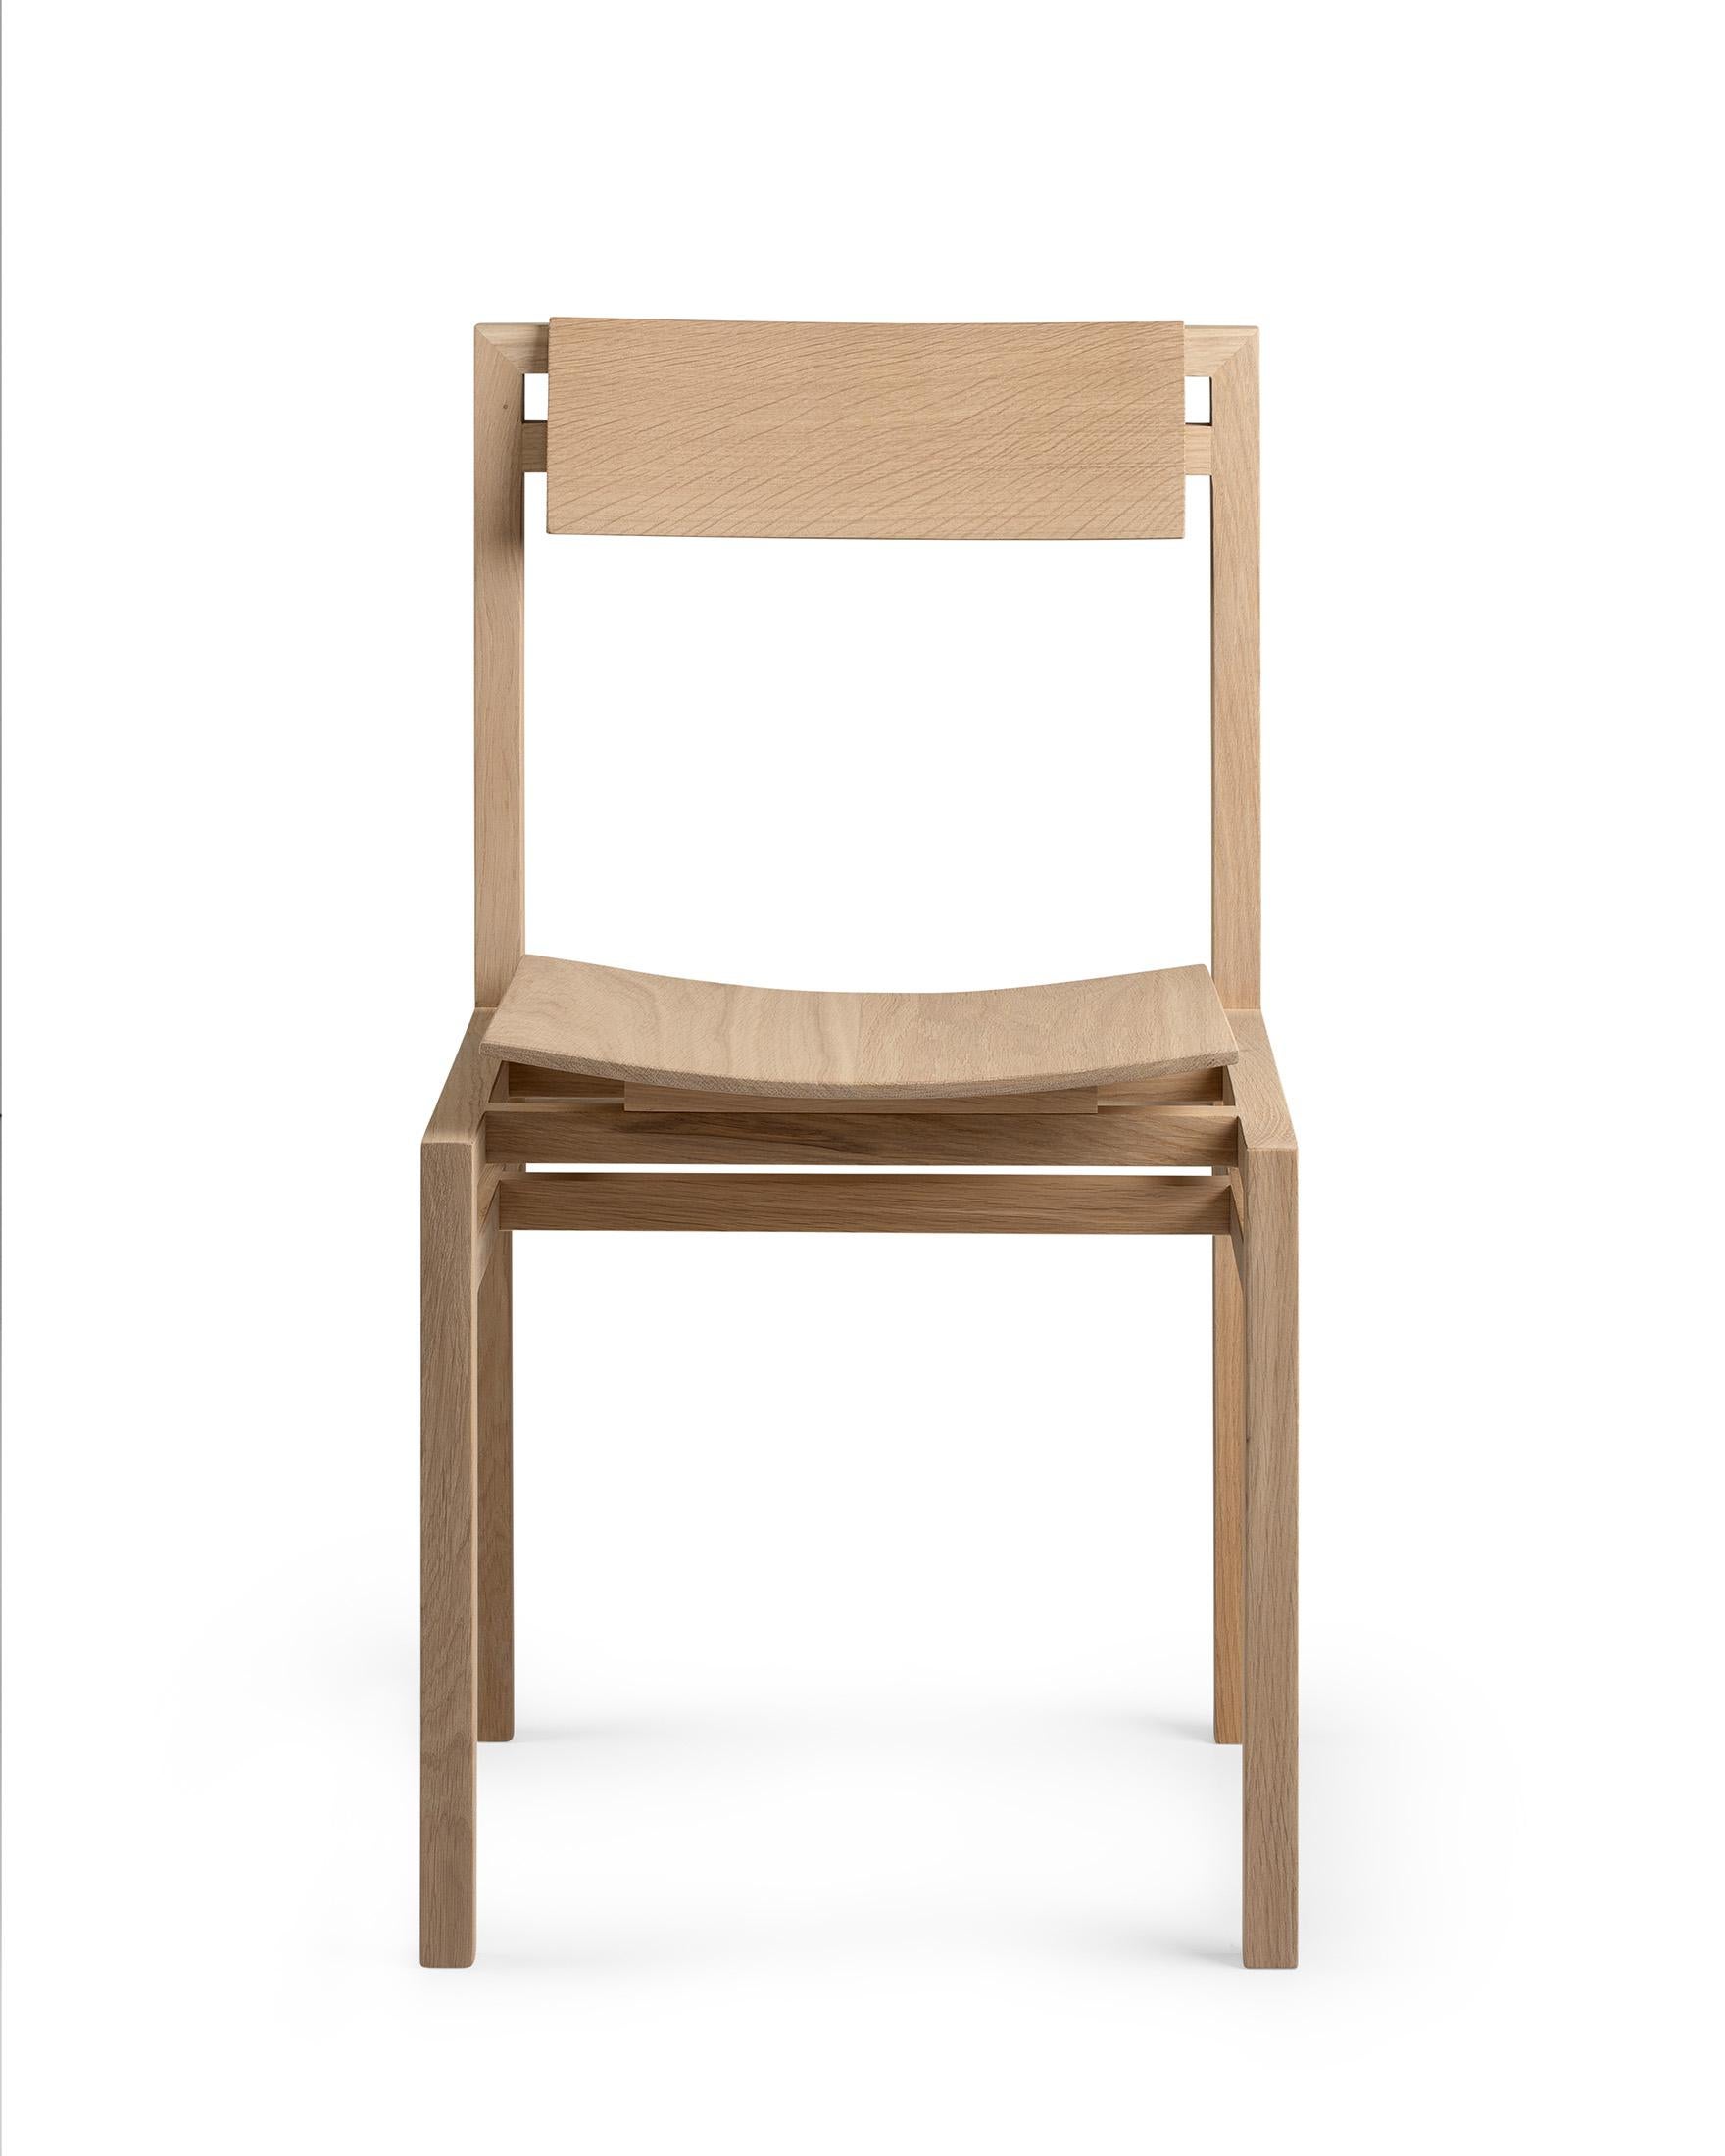 Hand-Crafted Kluskens Haus Chair For Sale